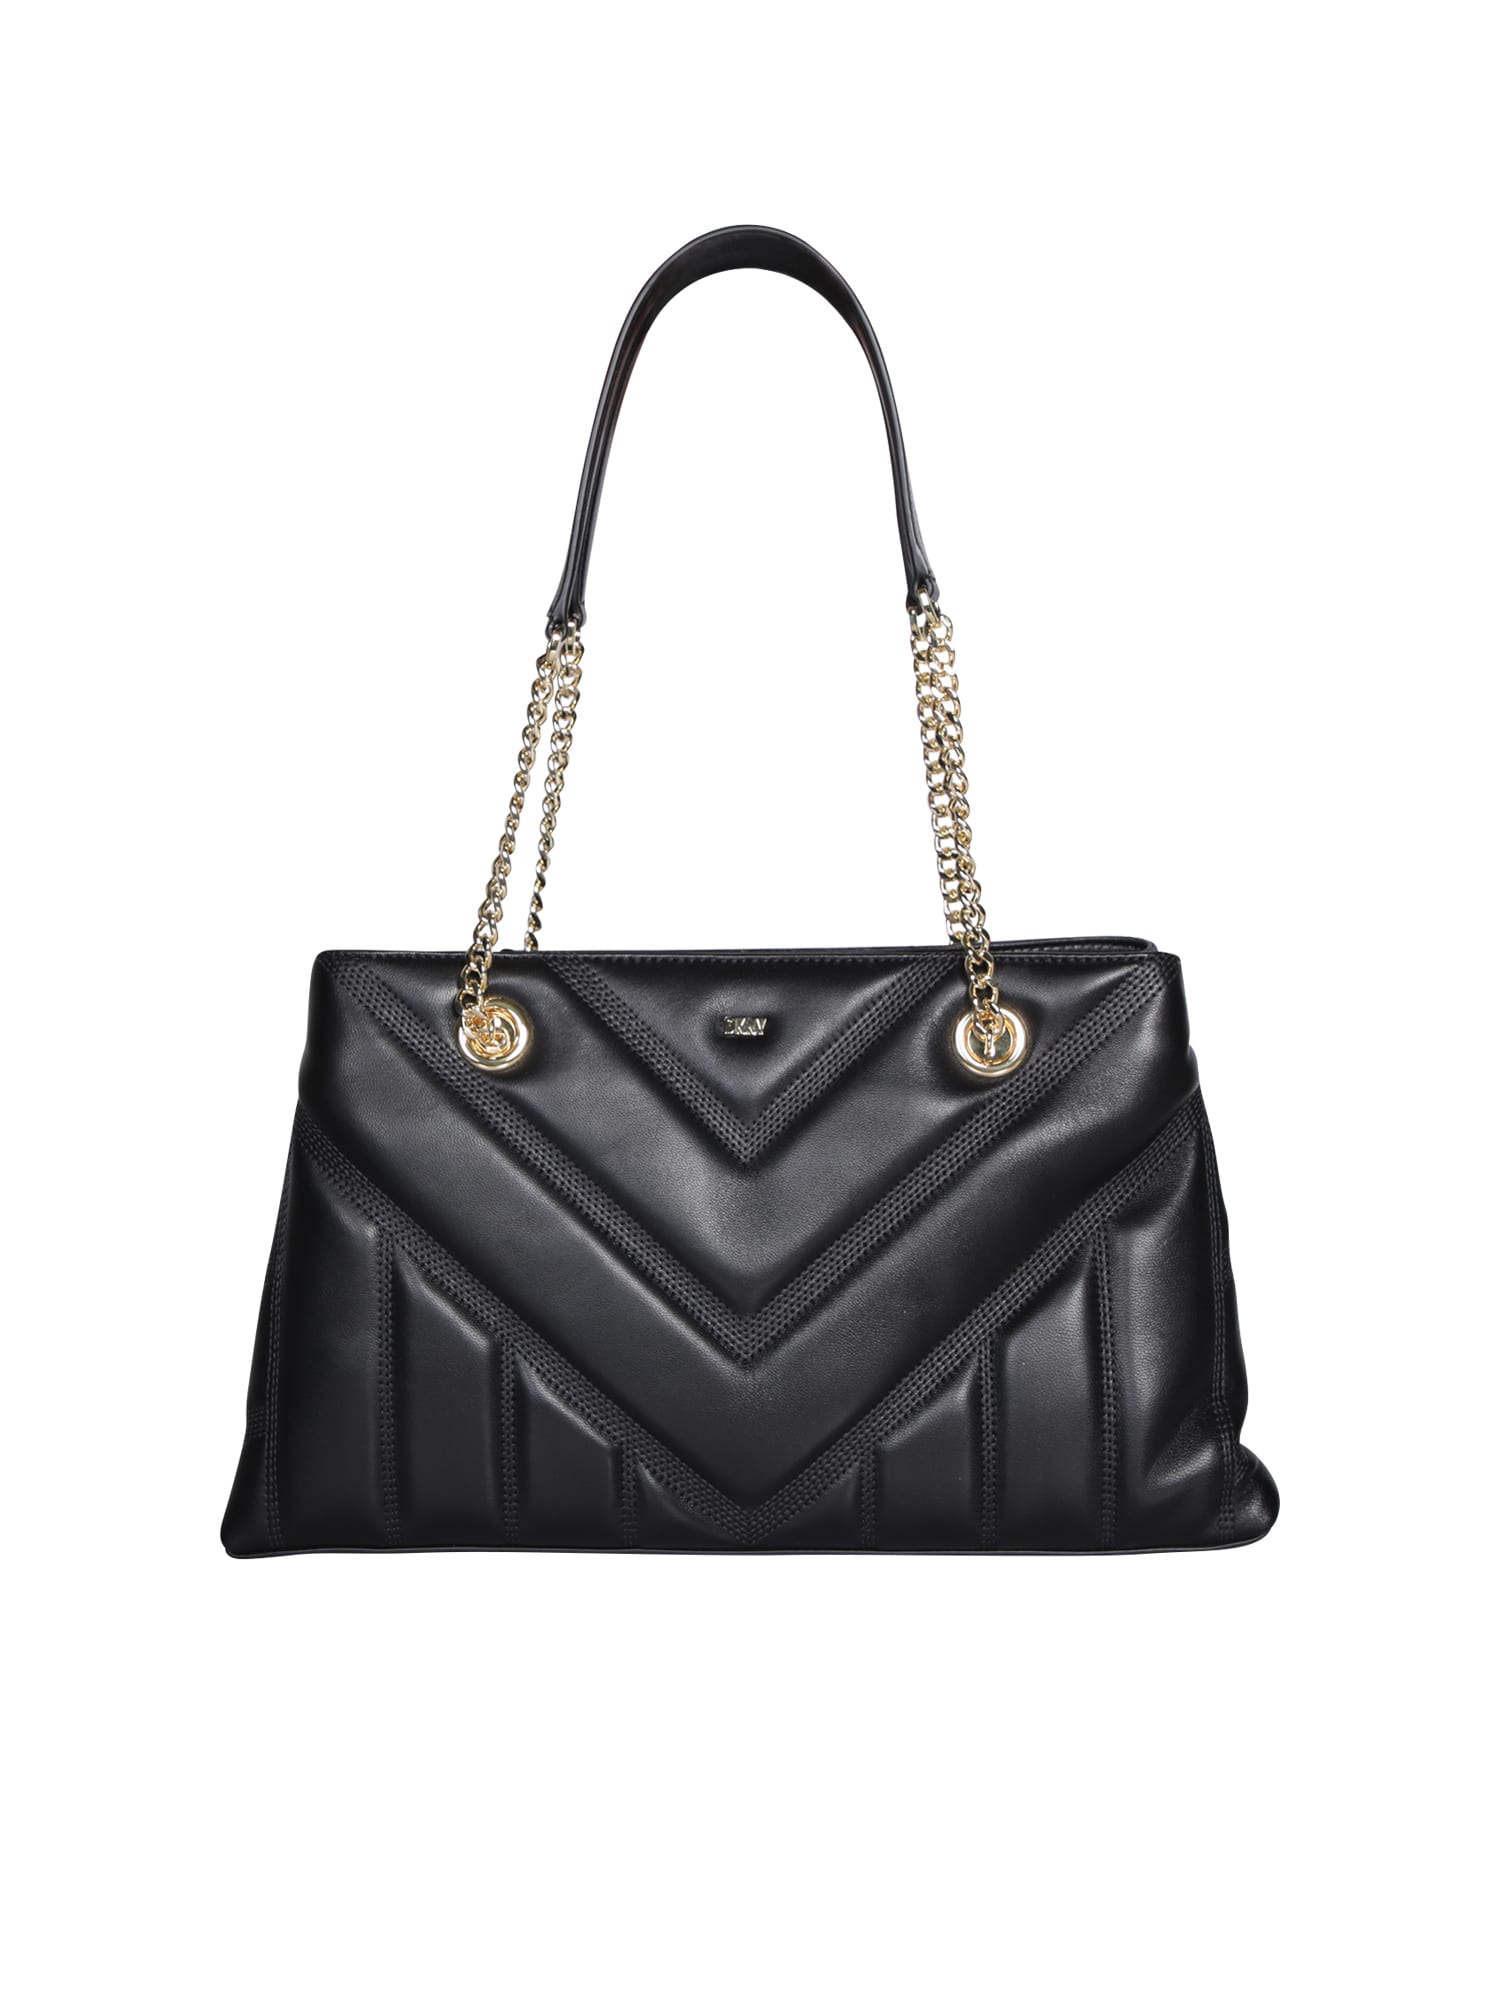 Dkny Chevron-Quilted Leather Tote Bag